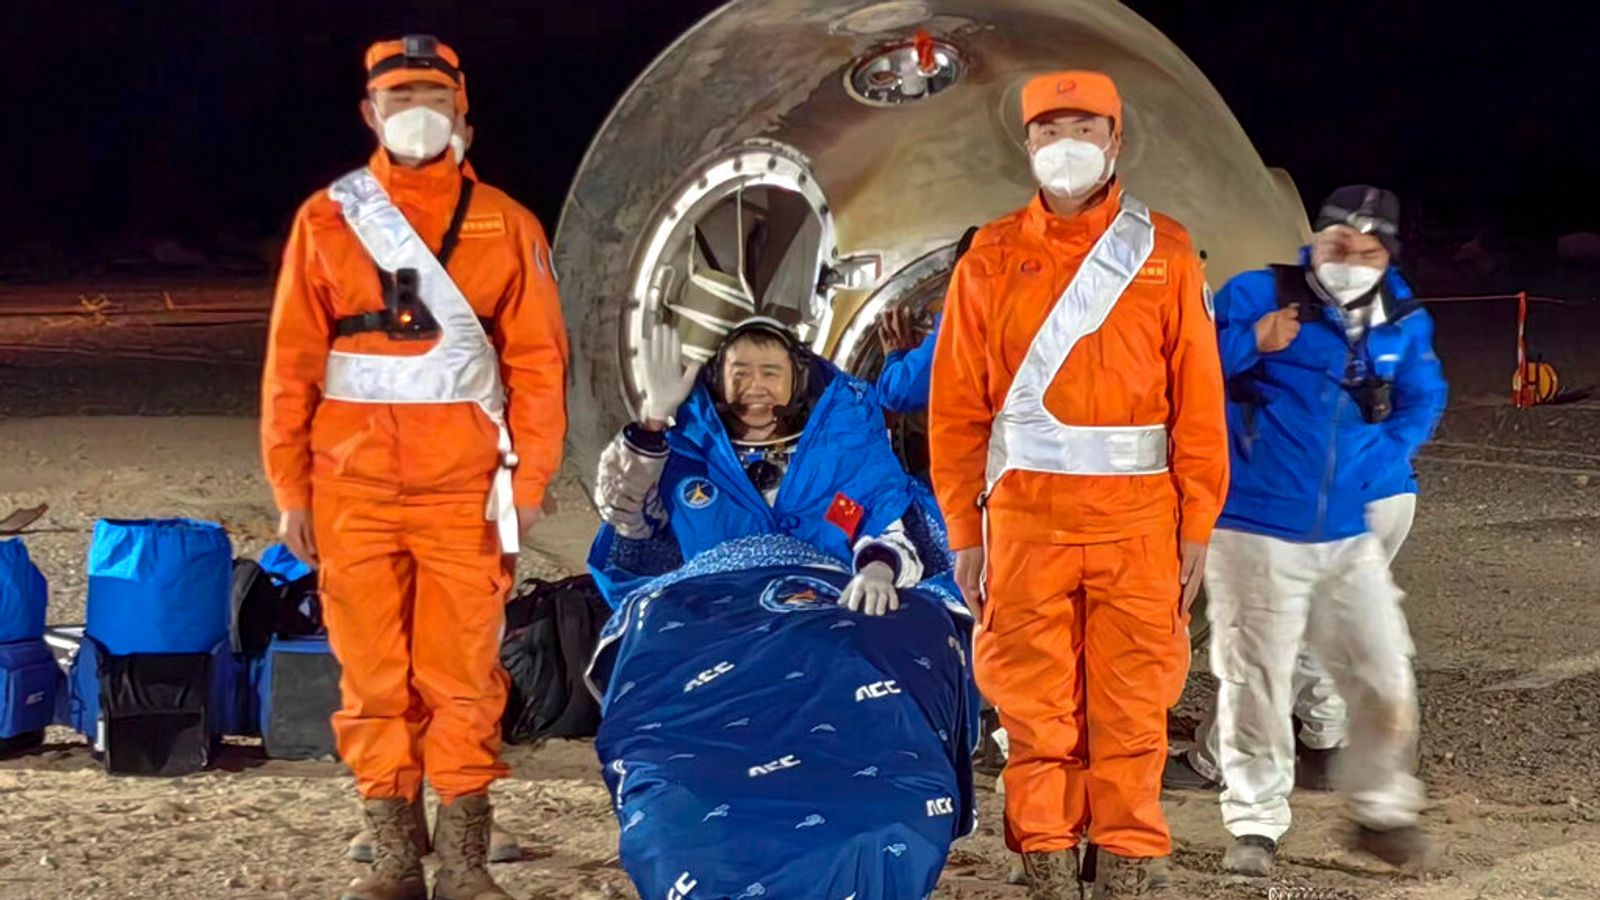 Chinese astronauts land back on Earth after six-month mission | Science & Tech News